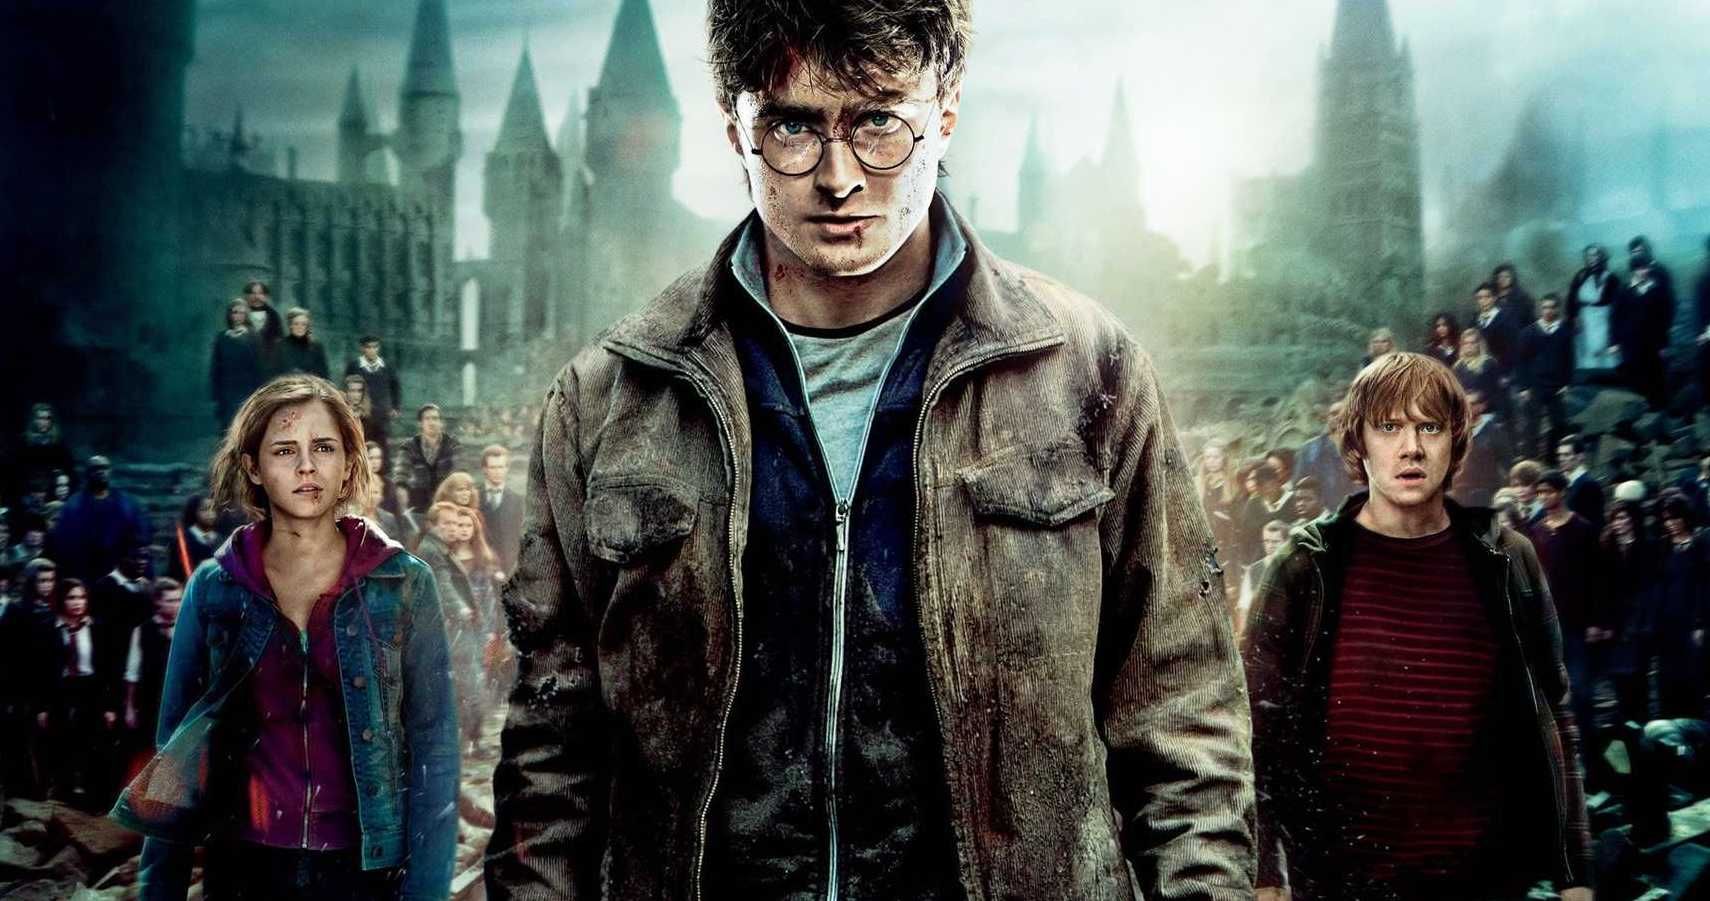 Harry Potter 10 Characters From The Books The Films Leave Out